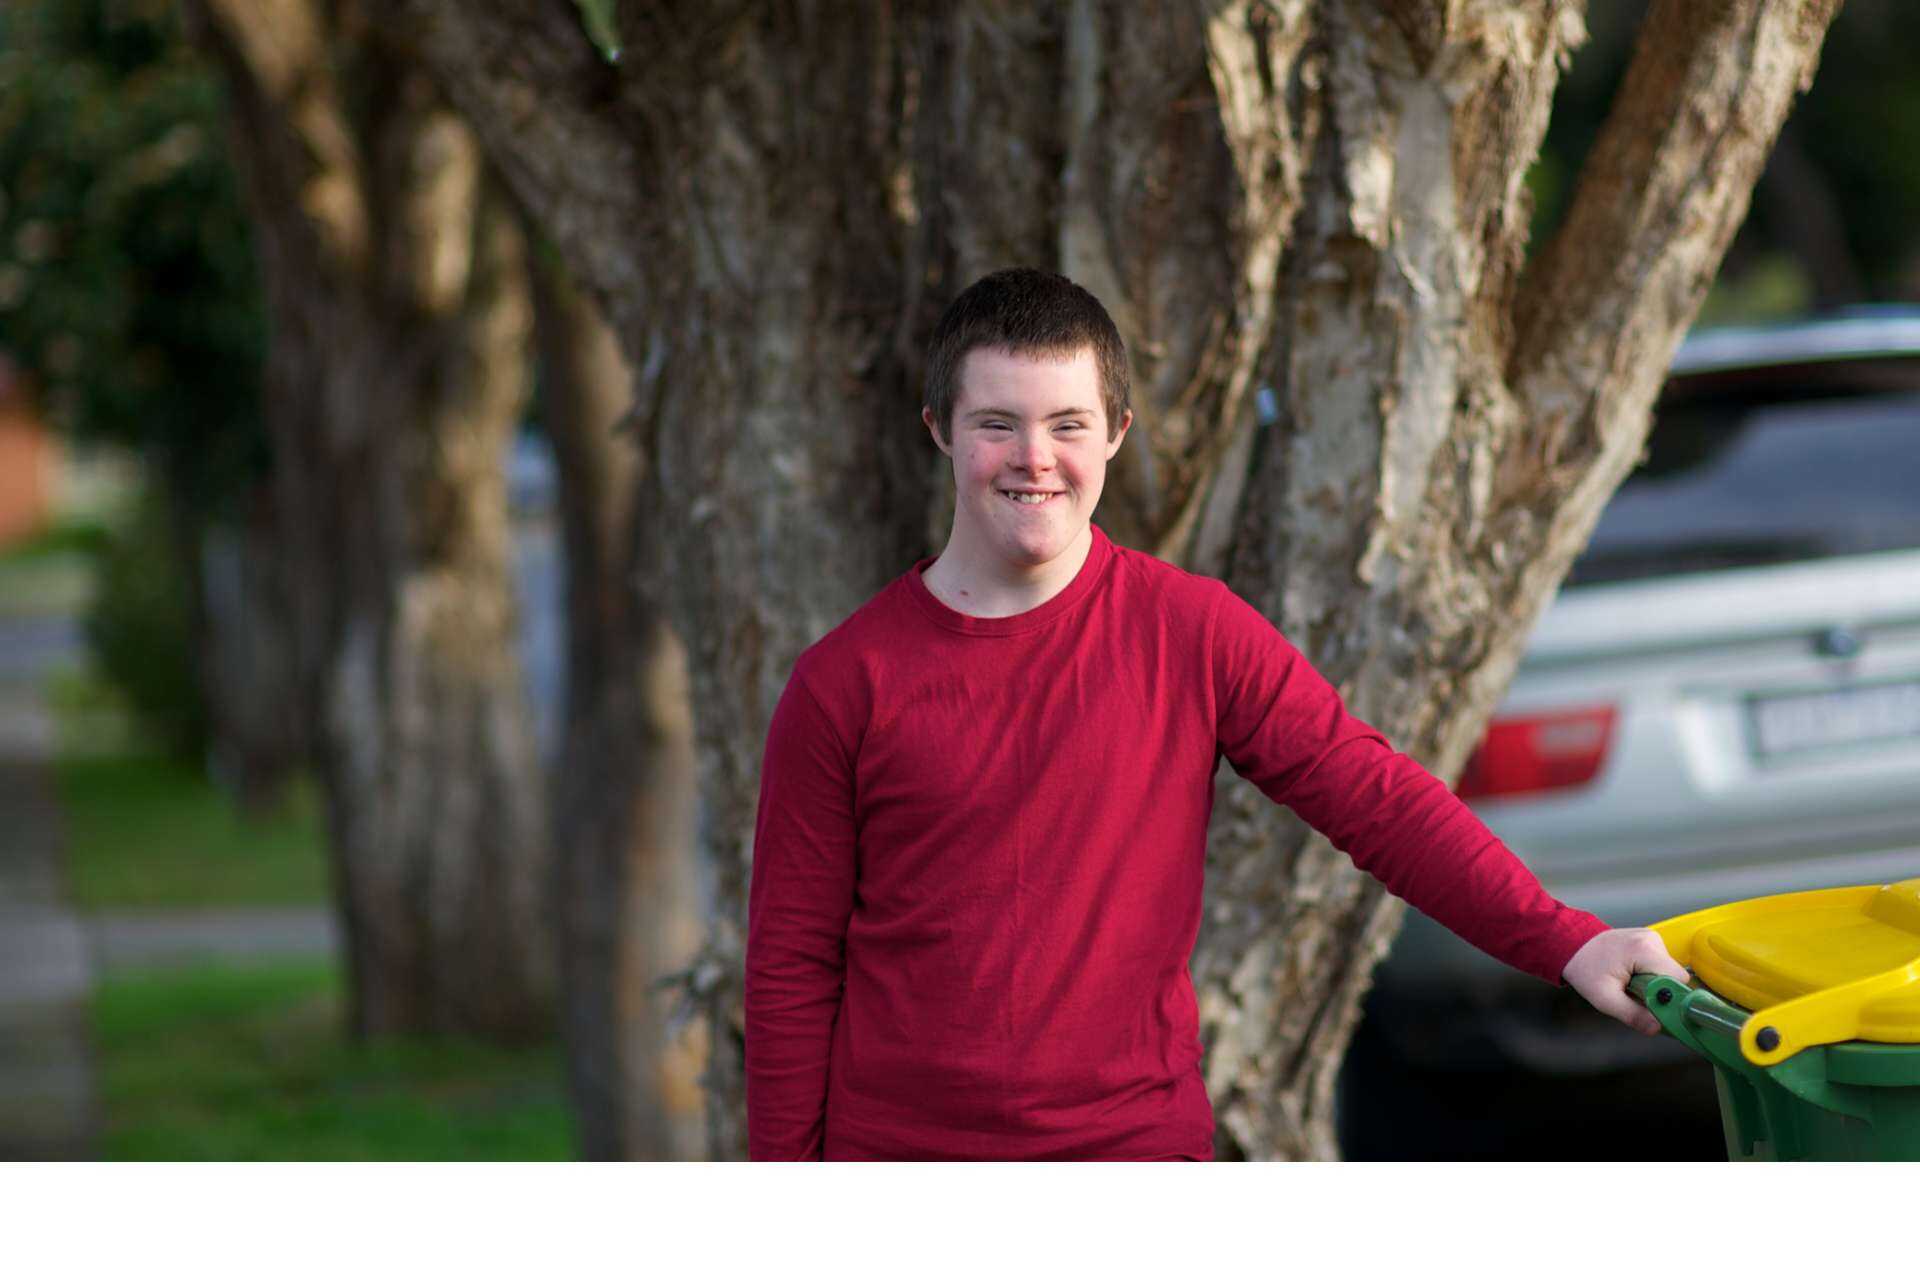 Portrait of a smiling boy in front of a tree